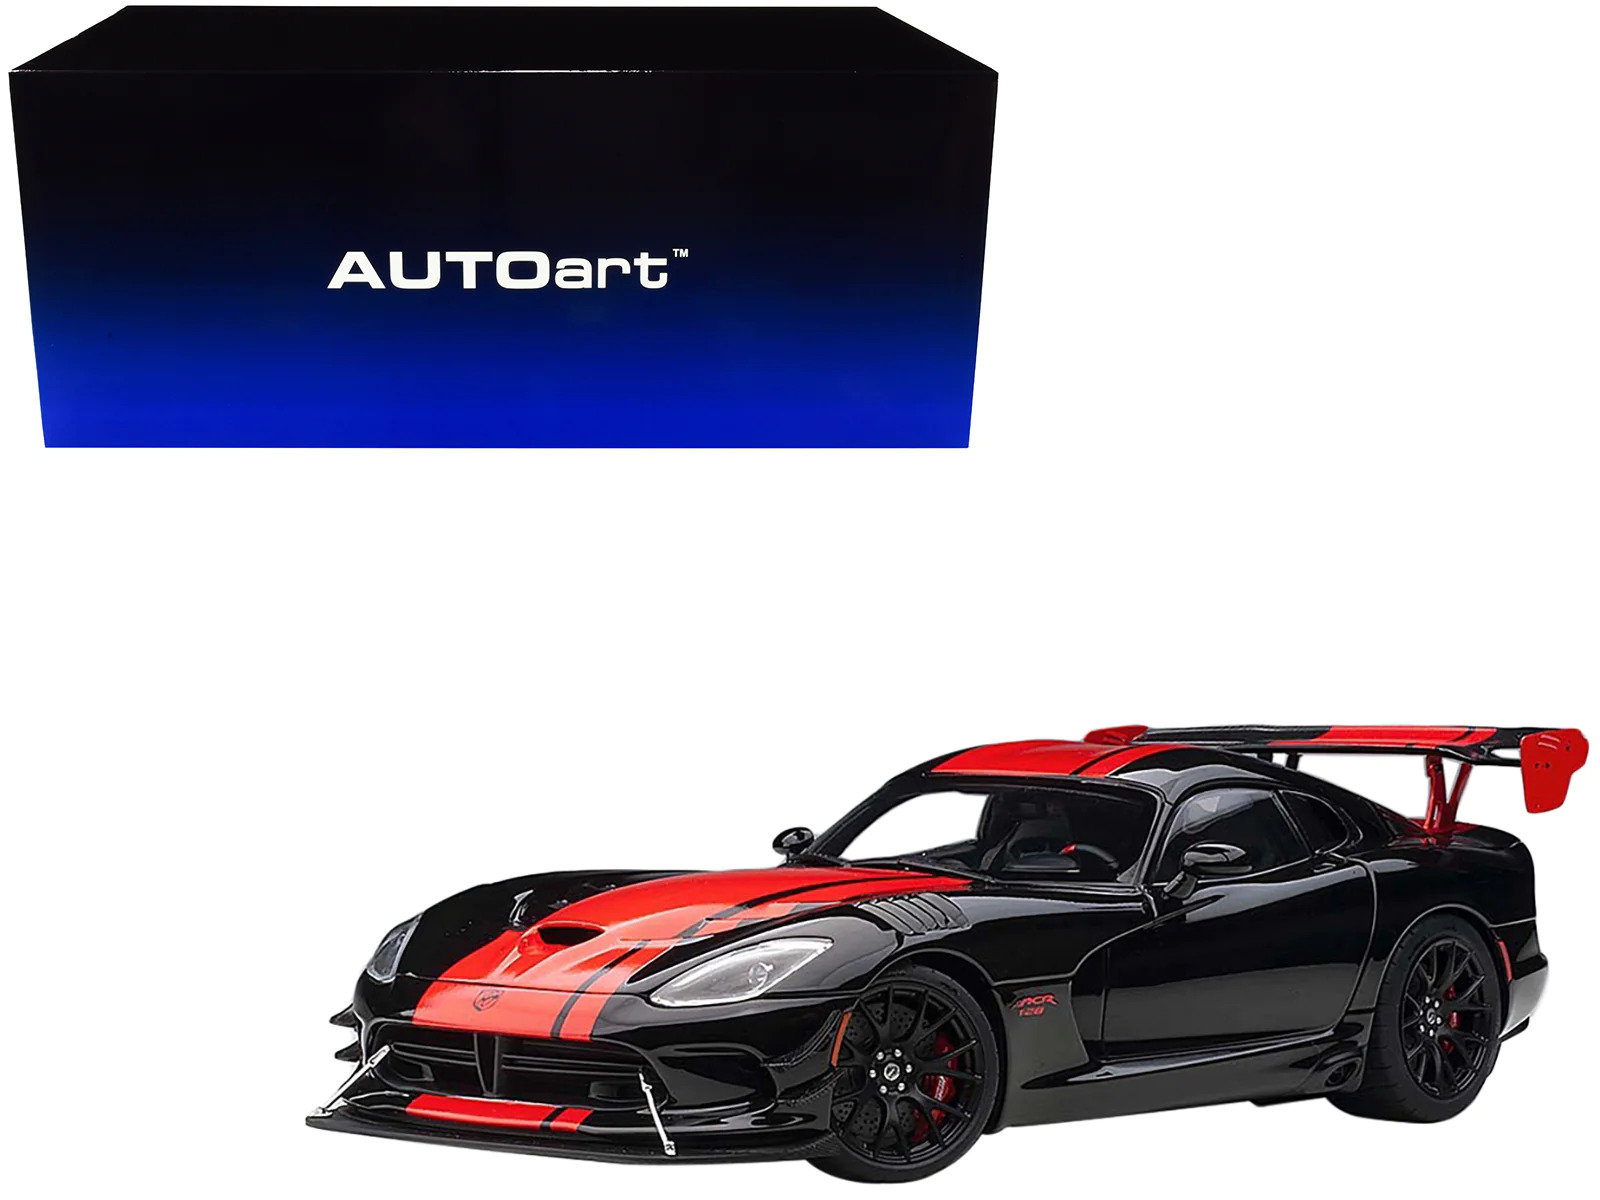 2017 Dodge Viper 1:28 Edition ACR Black with Red Stripes 1/18 Model Car